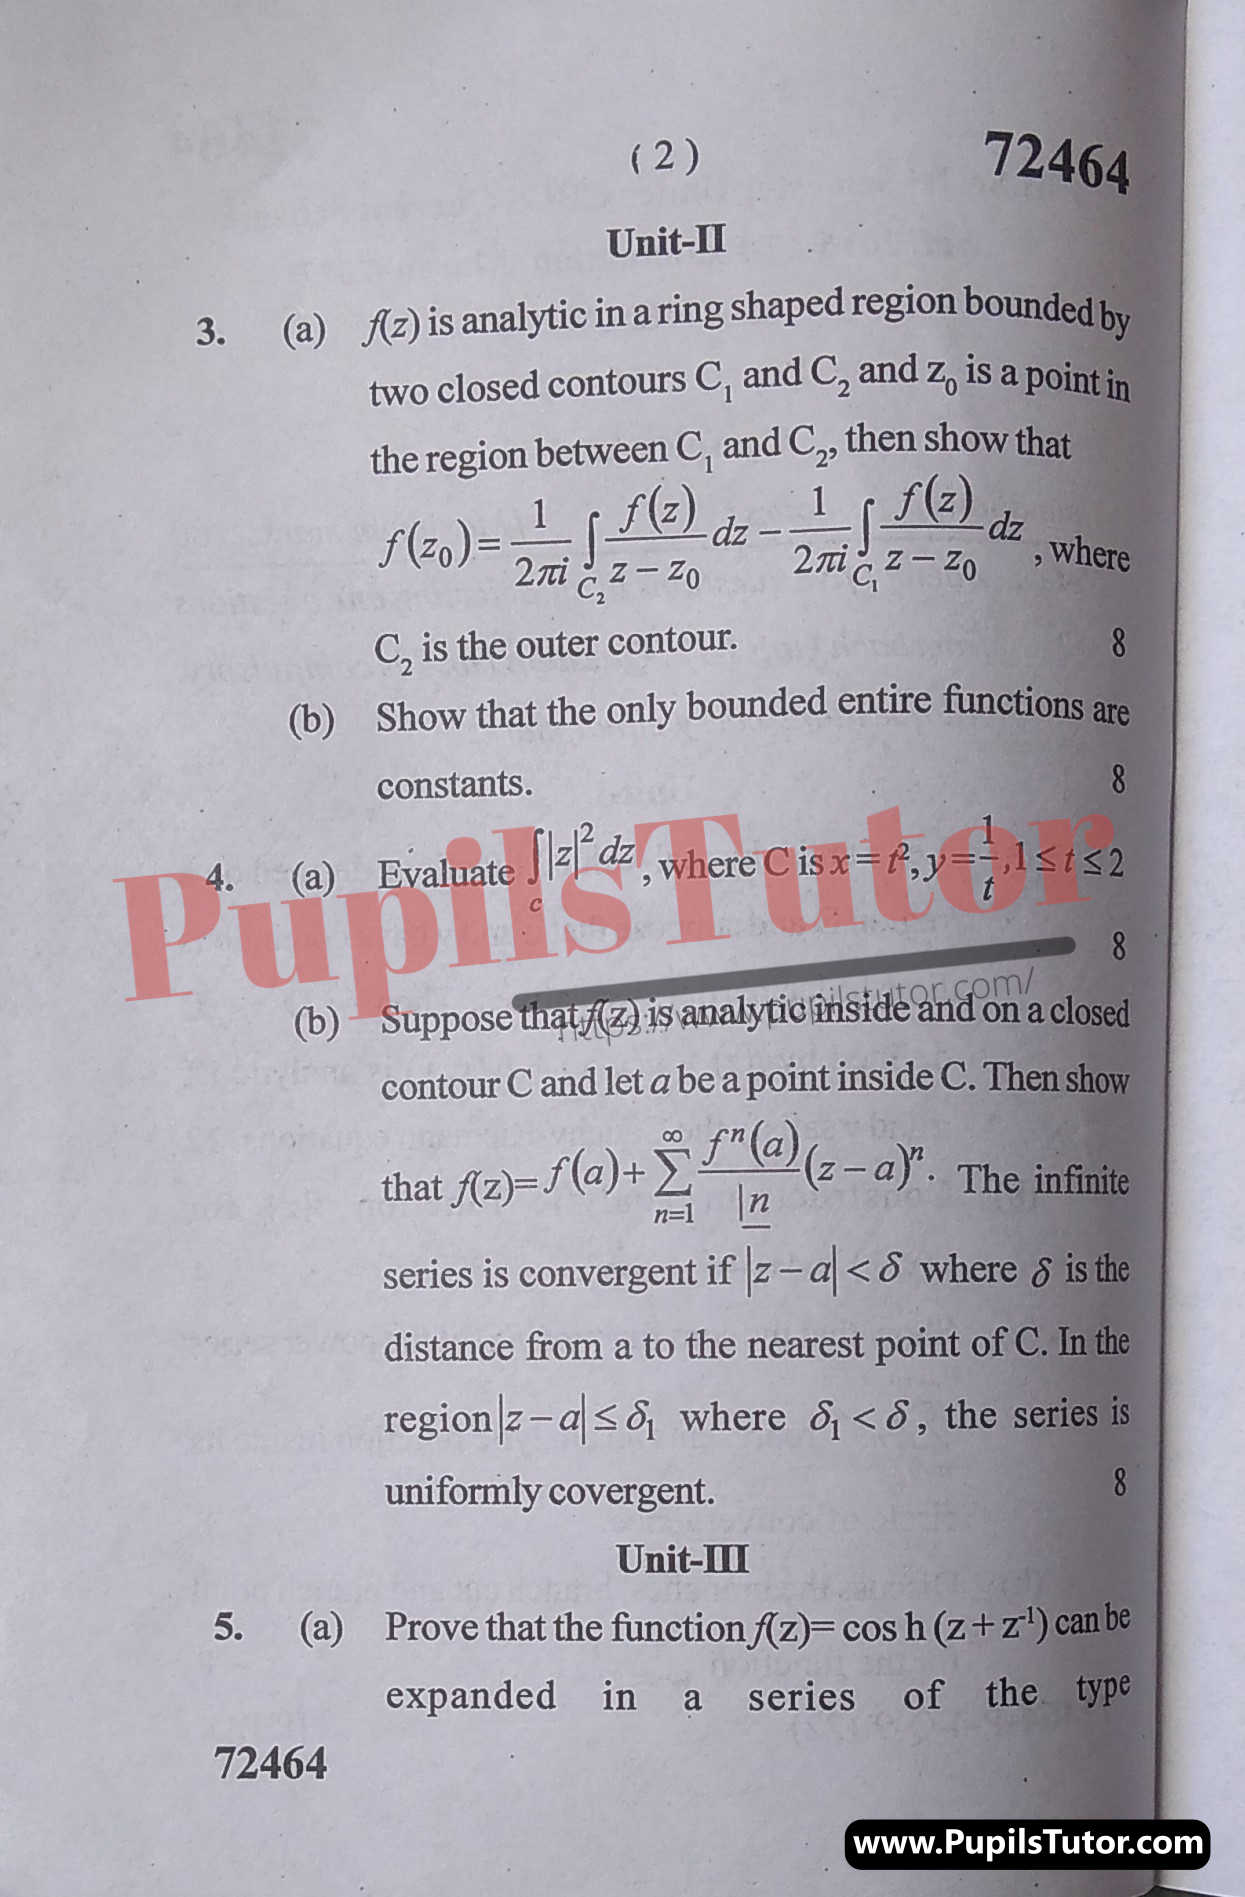 M.D. University M.Sc. [Mathematics] Complex Analysis First Semester Important Question Answer And Solution - www.pupilstutor.com (Paper Page Number 2)